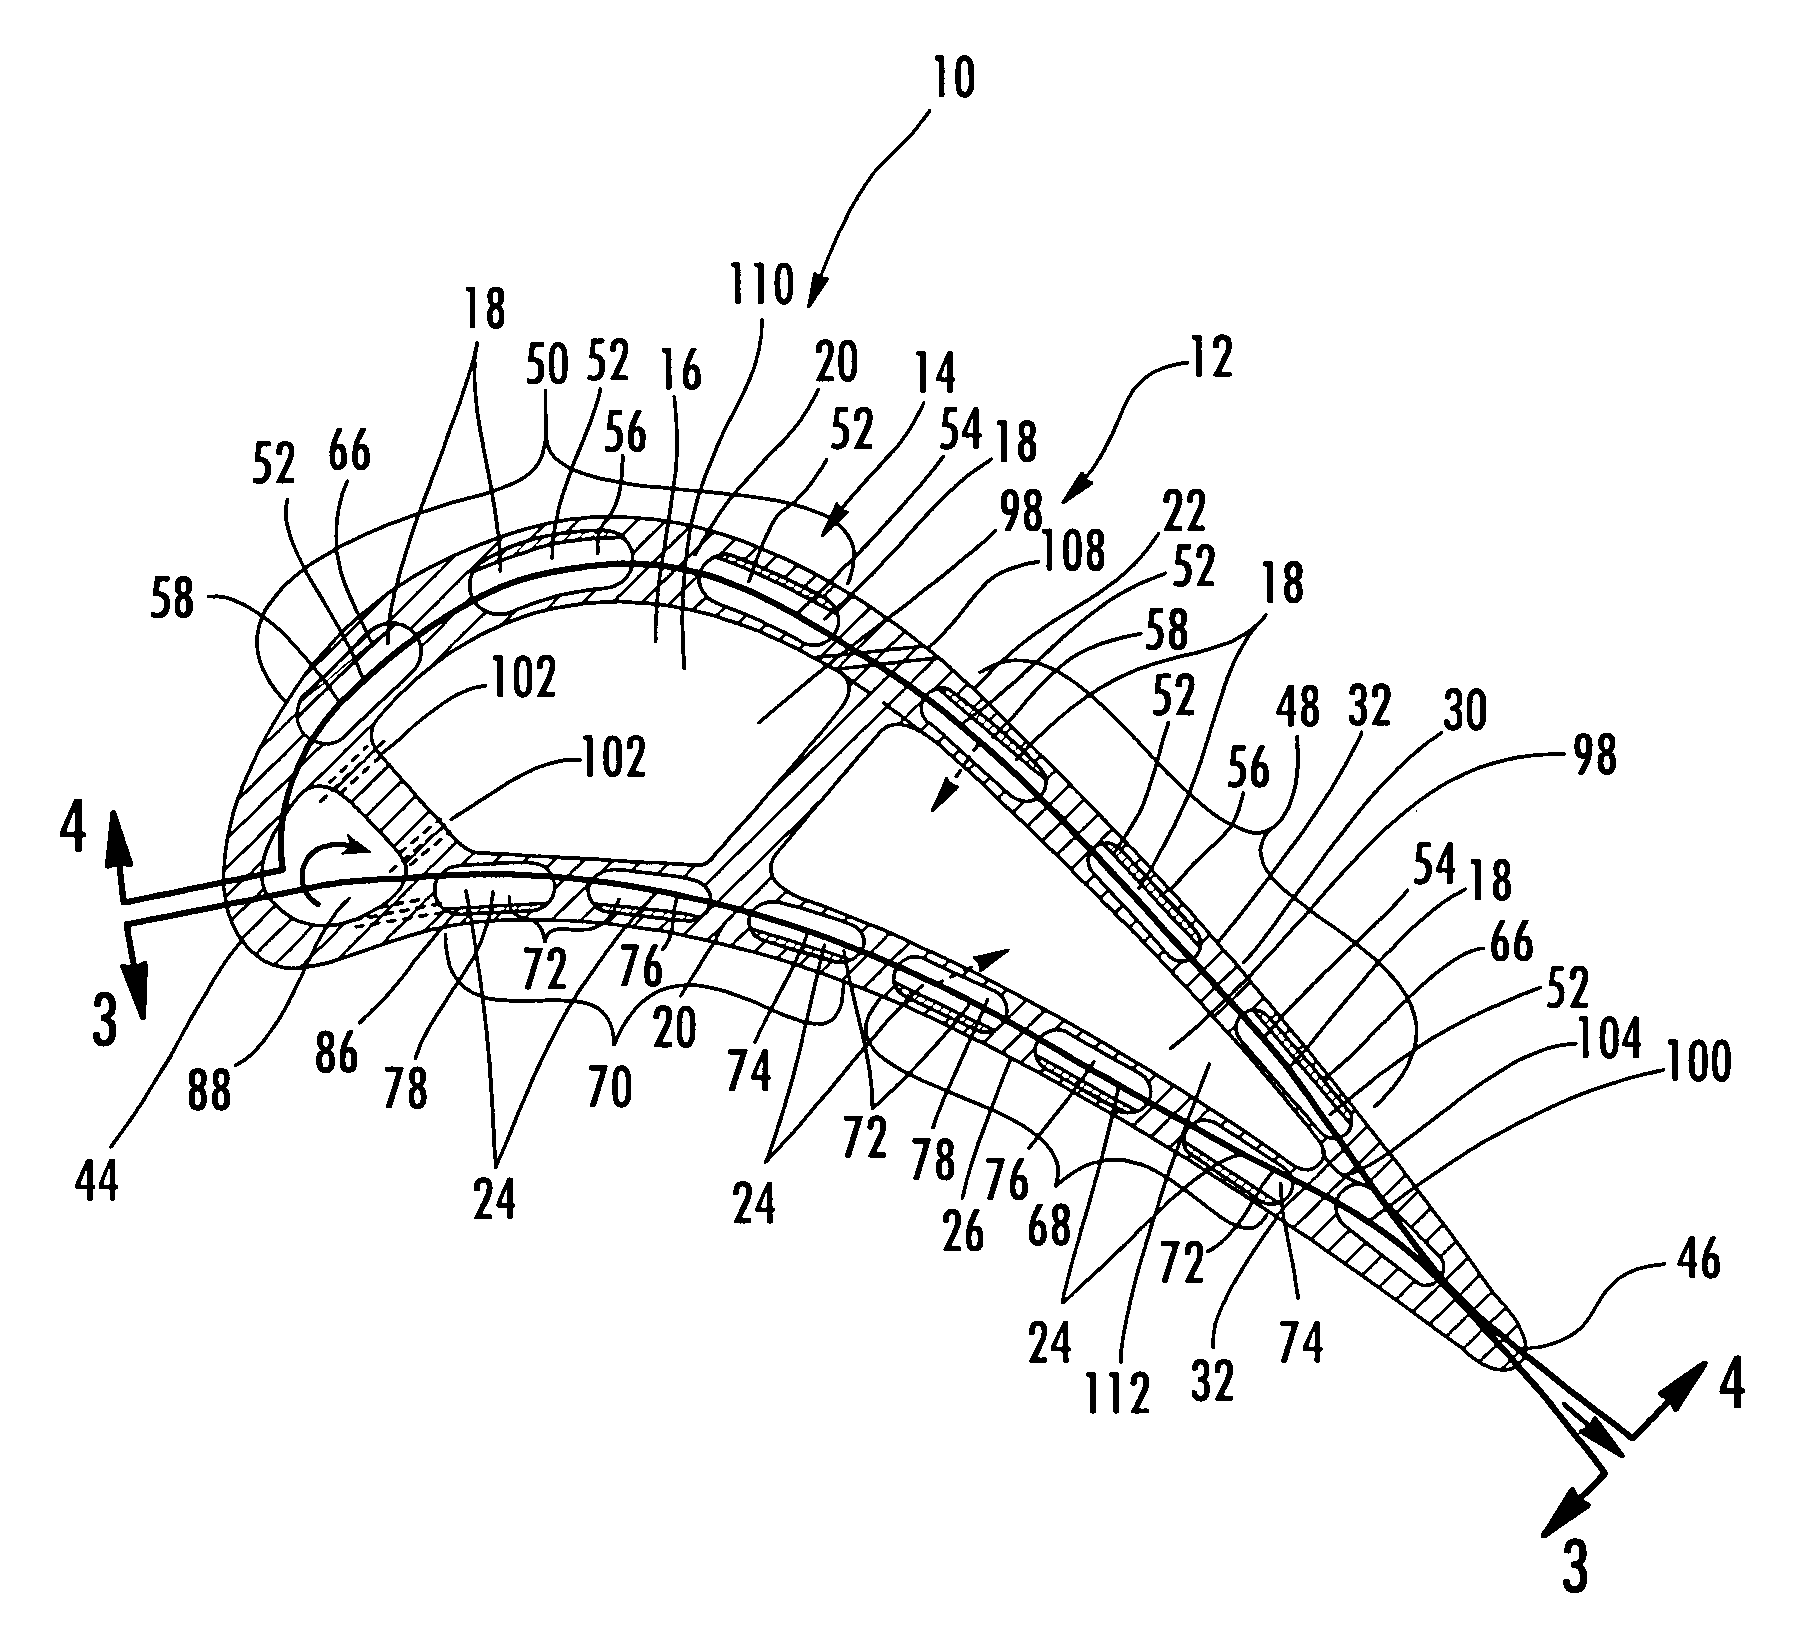 Turbine airfoil with near wall multi-serpentine cooling channels